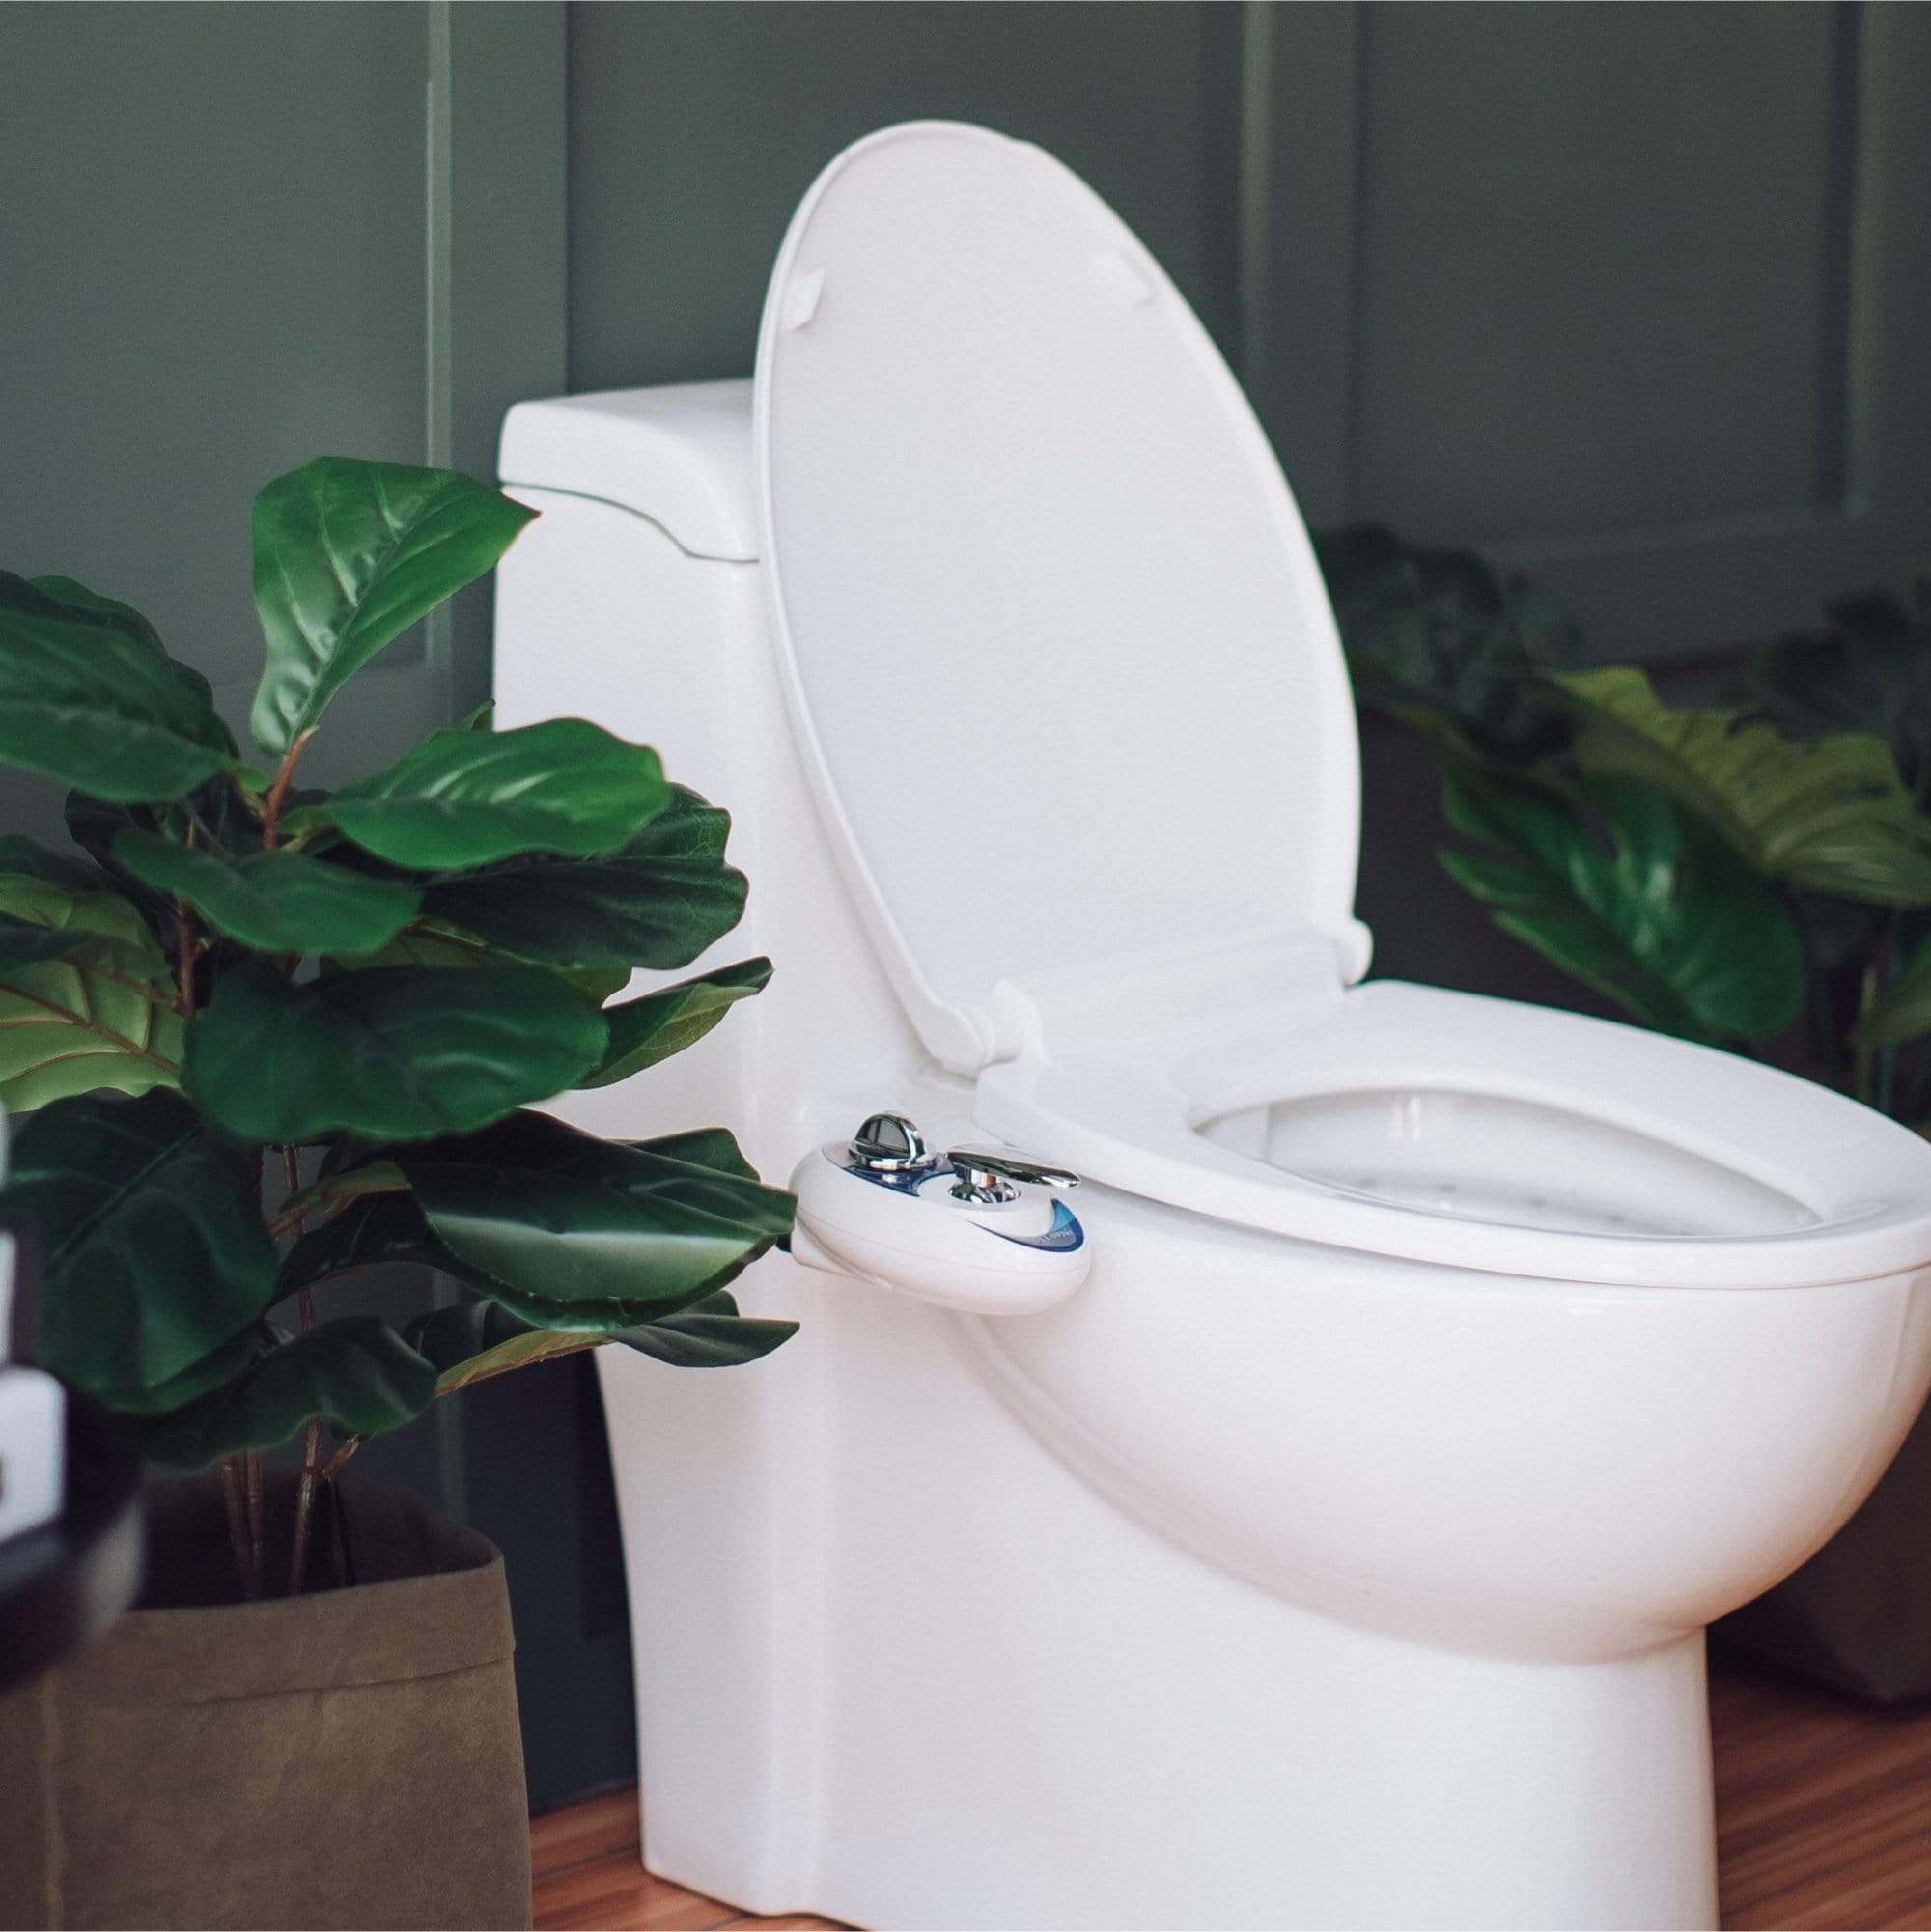 NEO 180: Imperfect Packaging - NEO 180 Blue installed on a toilet, in a modern bathroom with plants